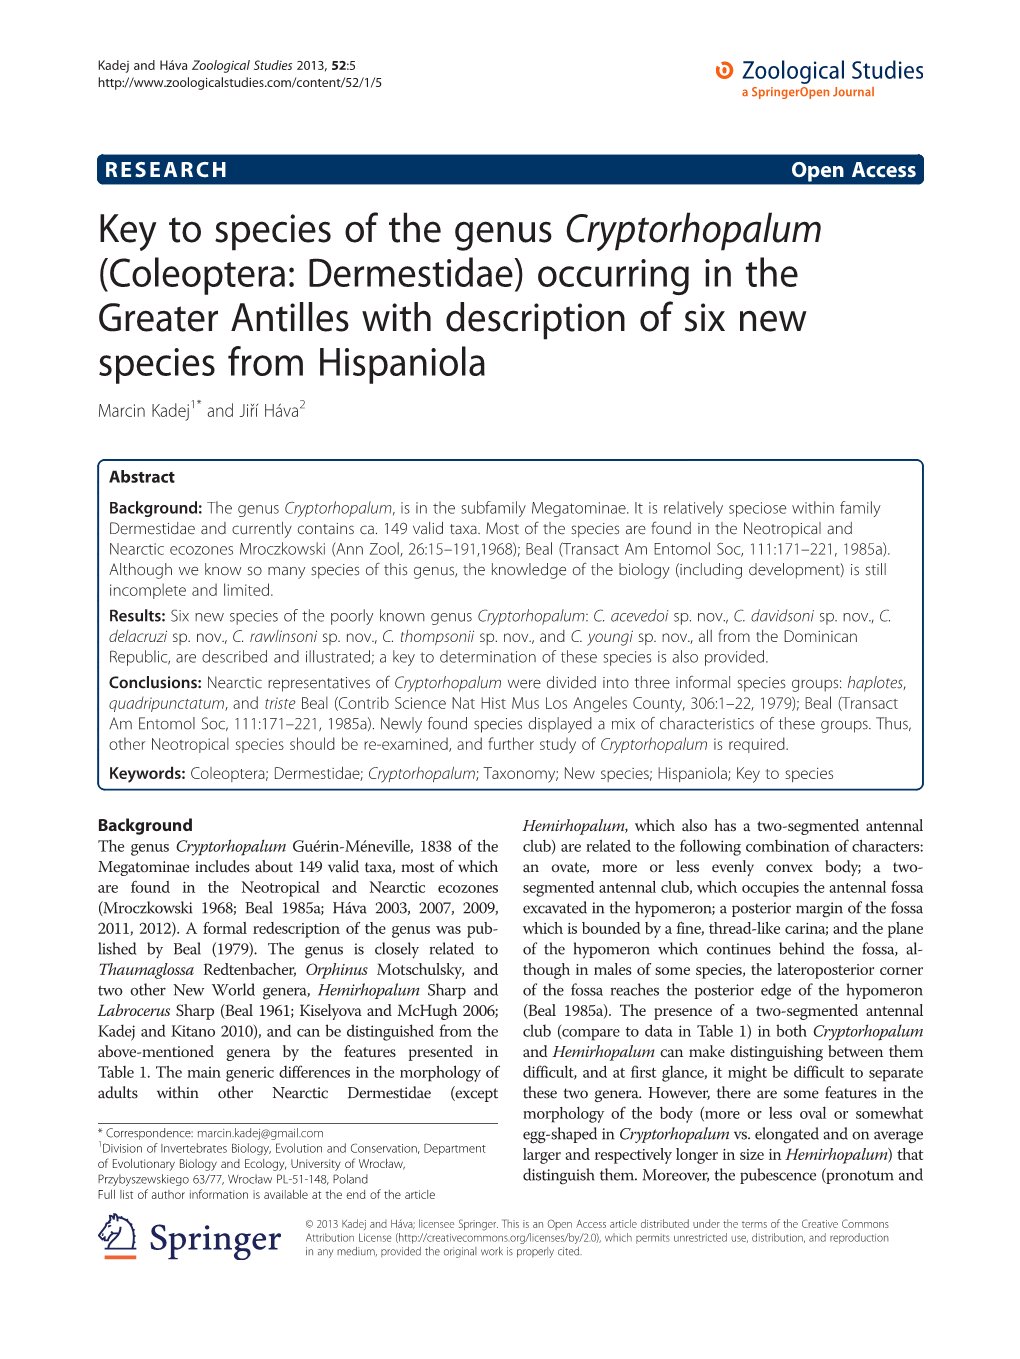 Key to Species of the Genus Cryptorhopalum (Coleoptera: Dermestidae) Occurring in the Greater Antilles with Description of Six N